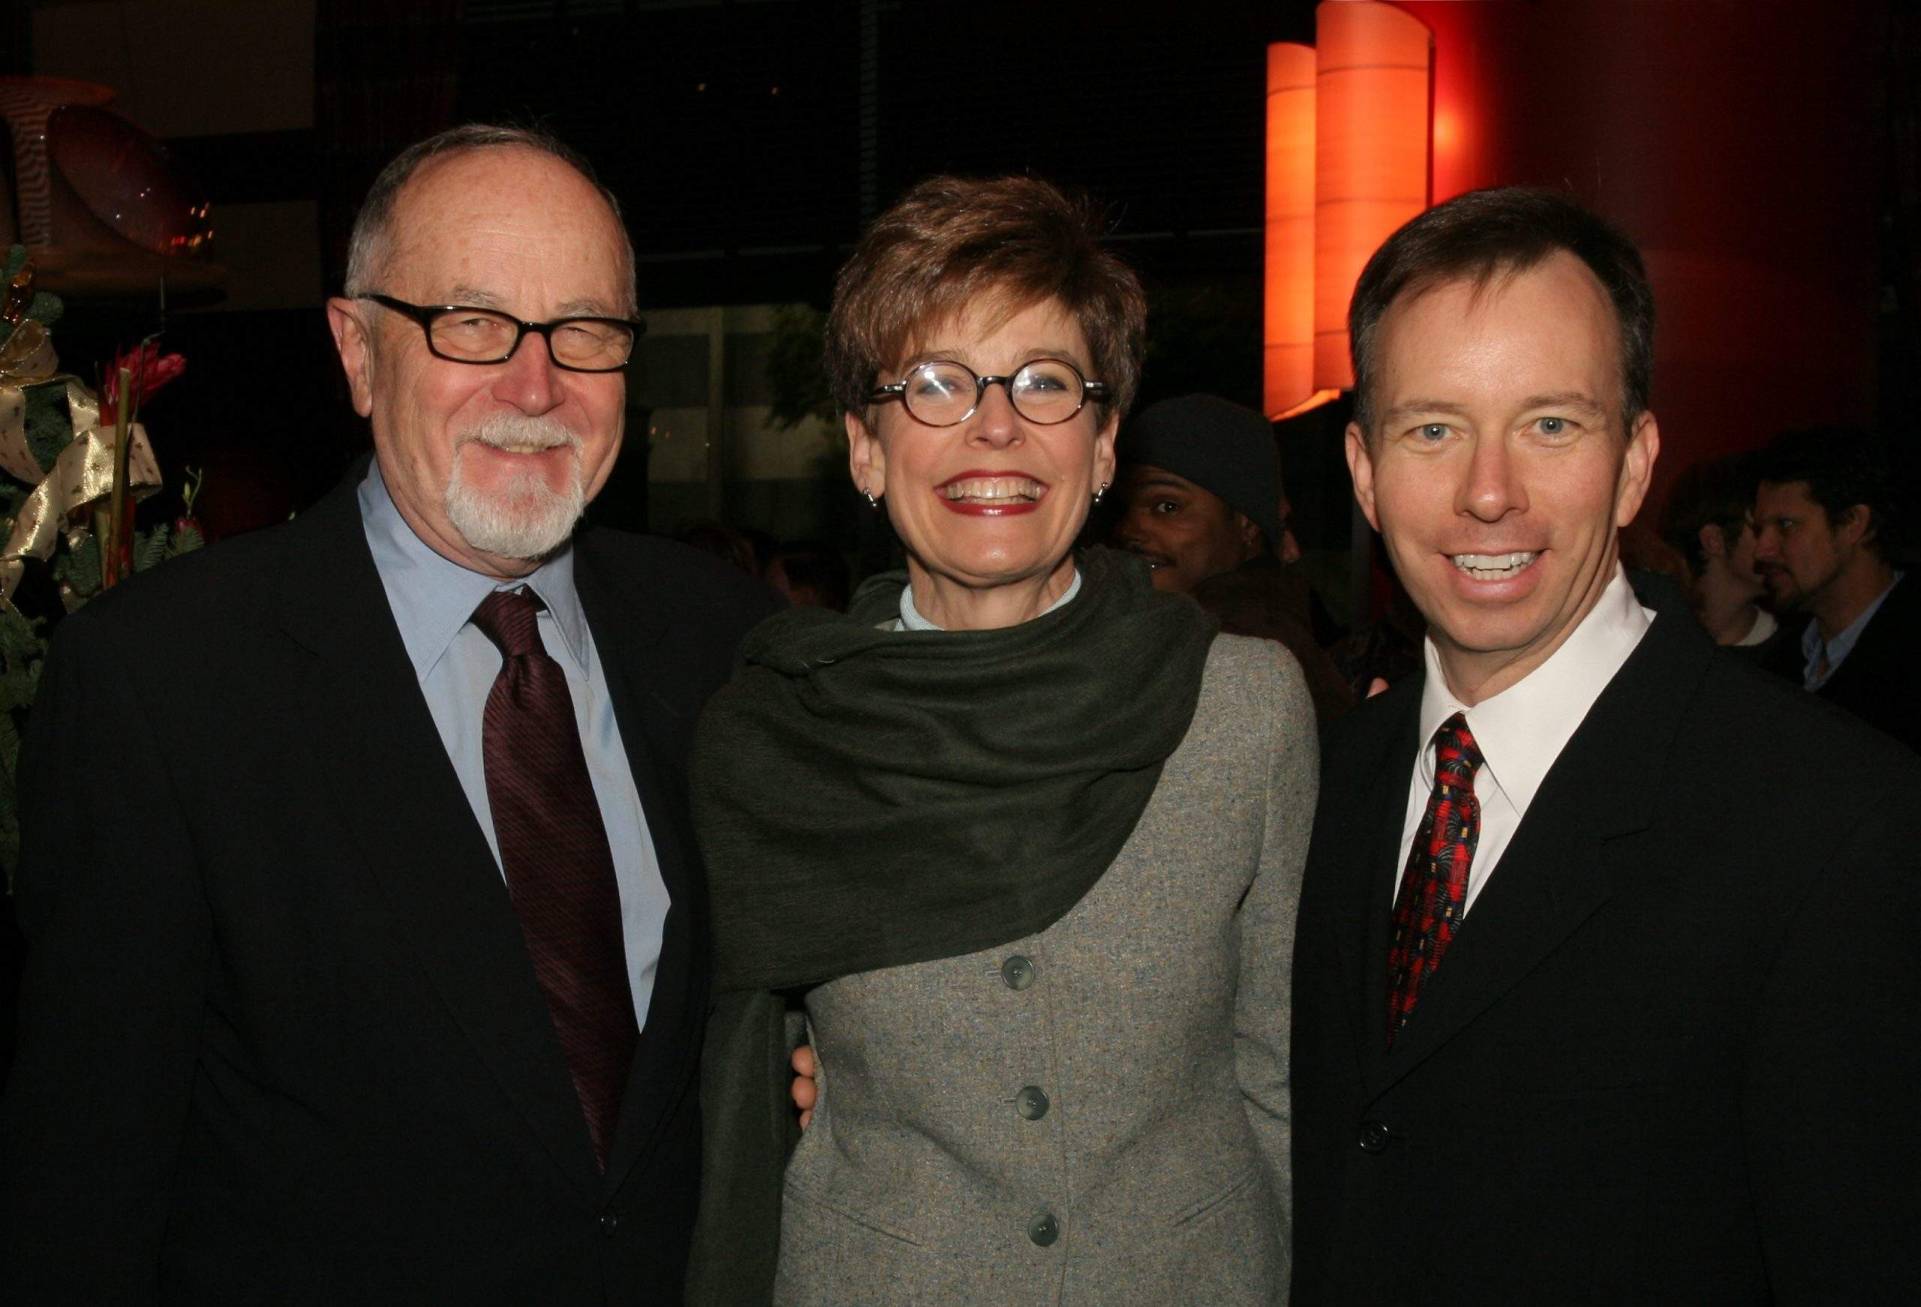 On opening night with Gil Cates and Dr. Judith Reichman